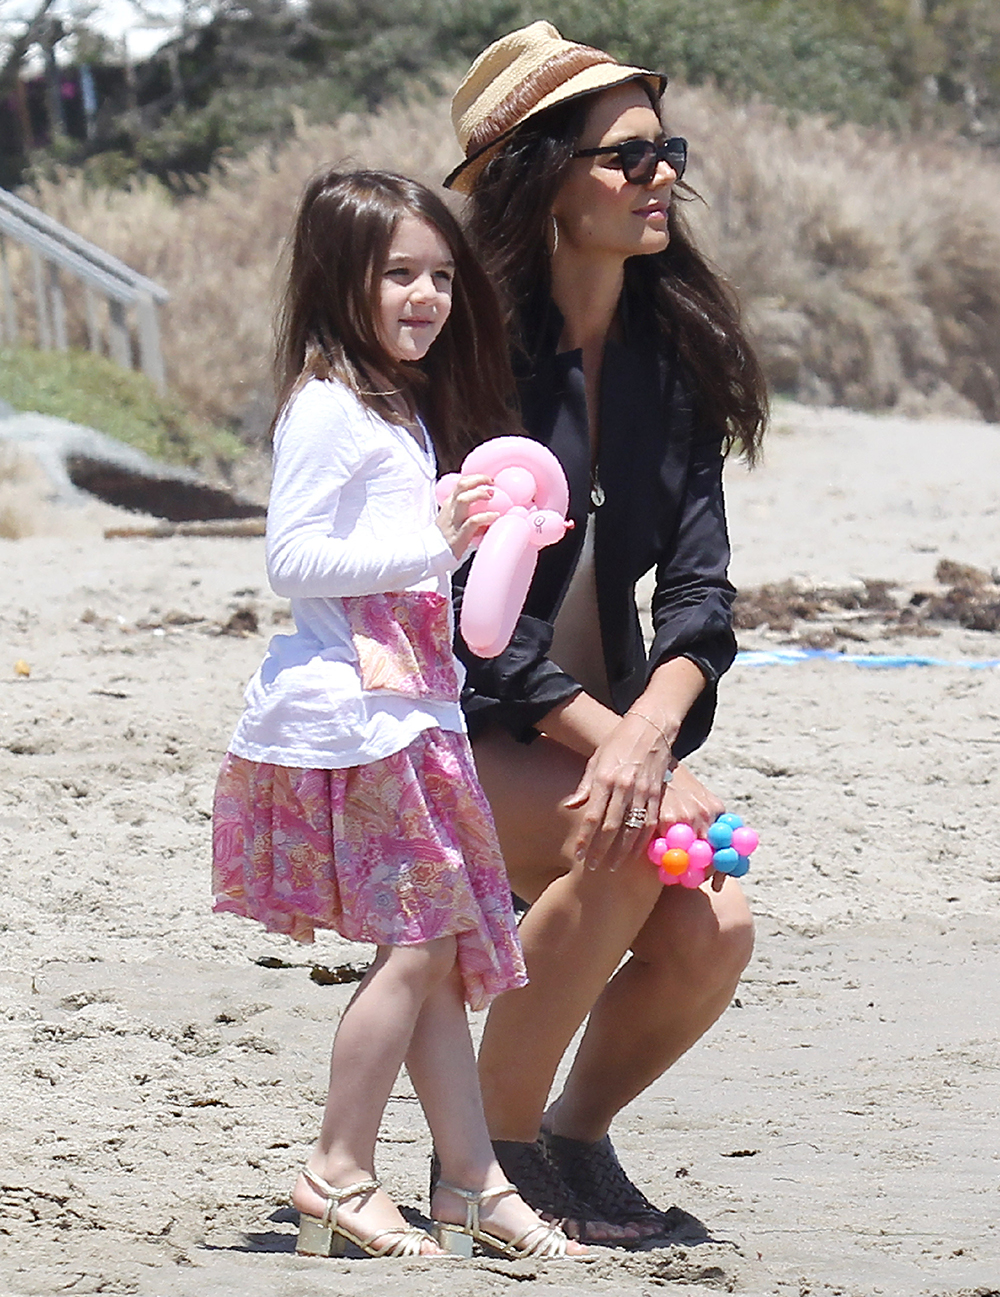 <p>Katie Holmes and Suri Cruise enjoyed Memorial Day at the beach in Malibu on May 30, 2011. The pair were dressed up for some fun festivities. </p>